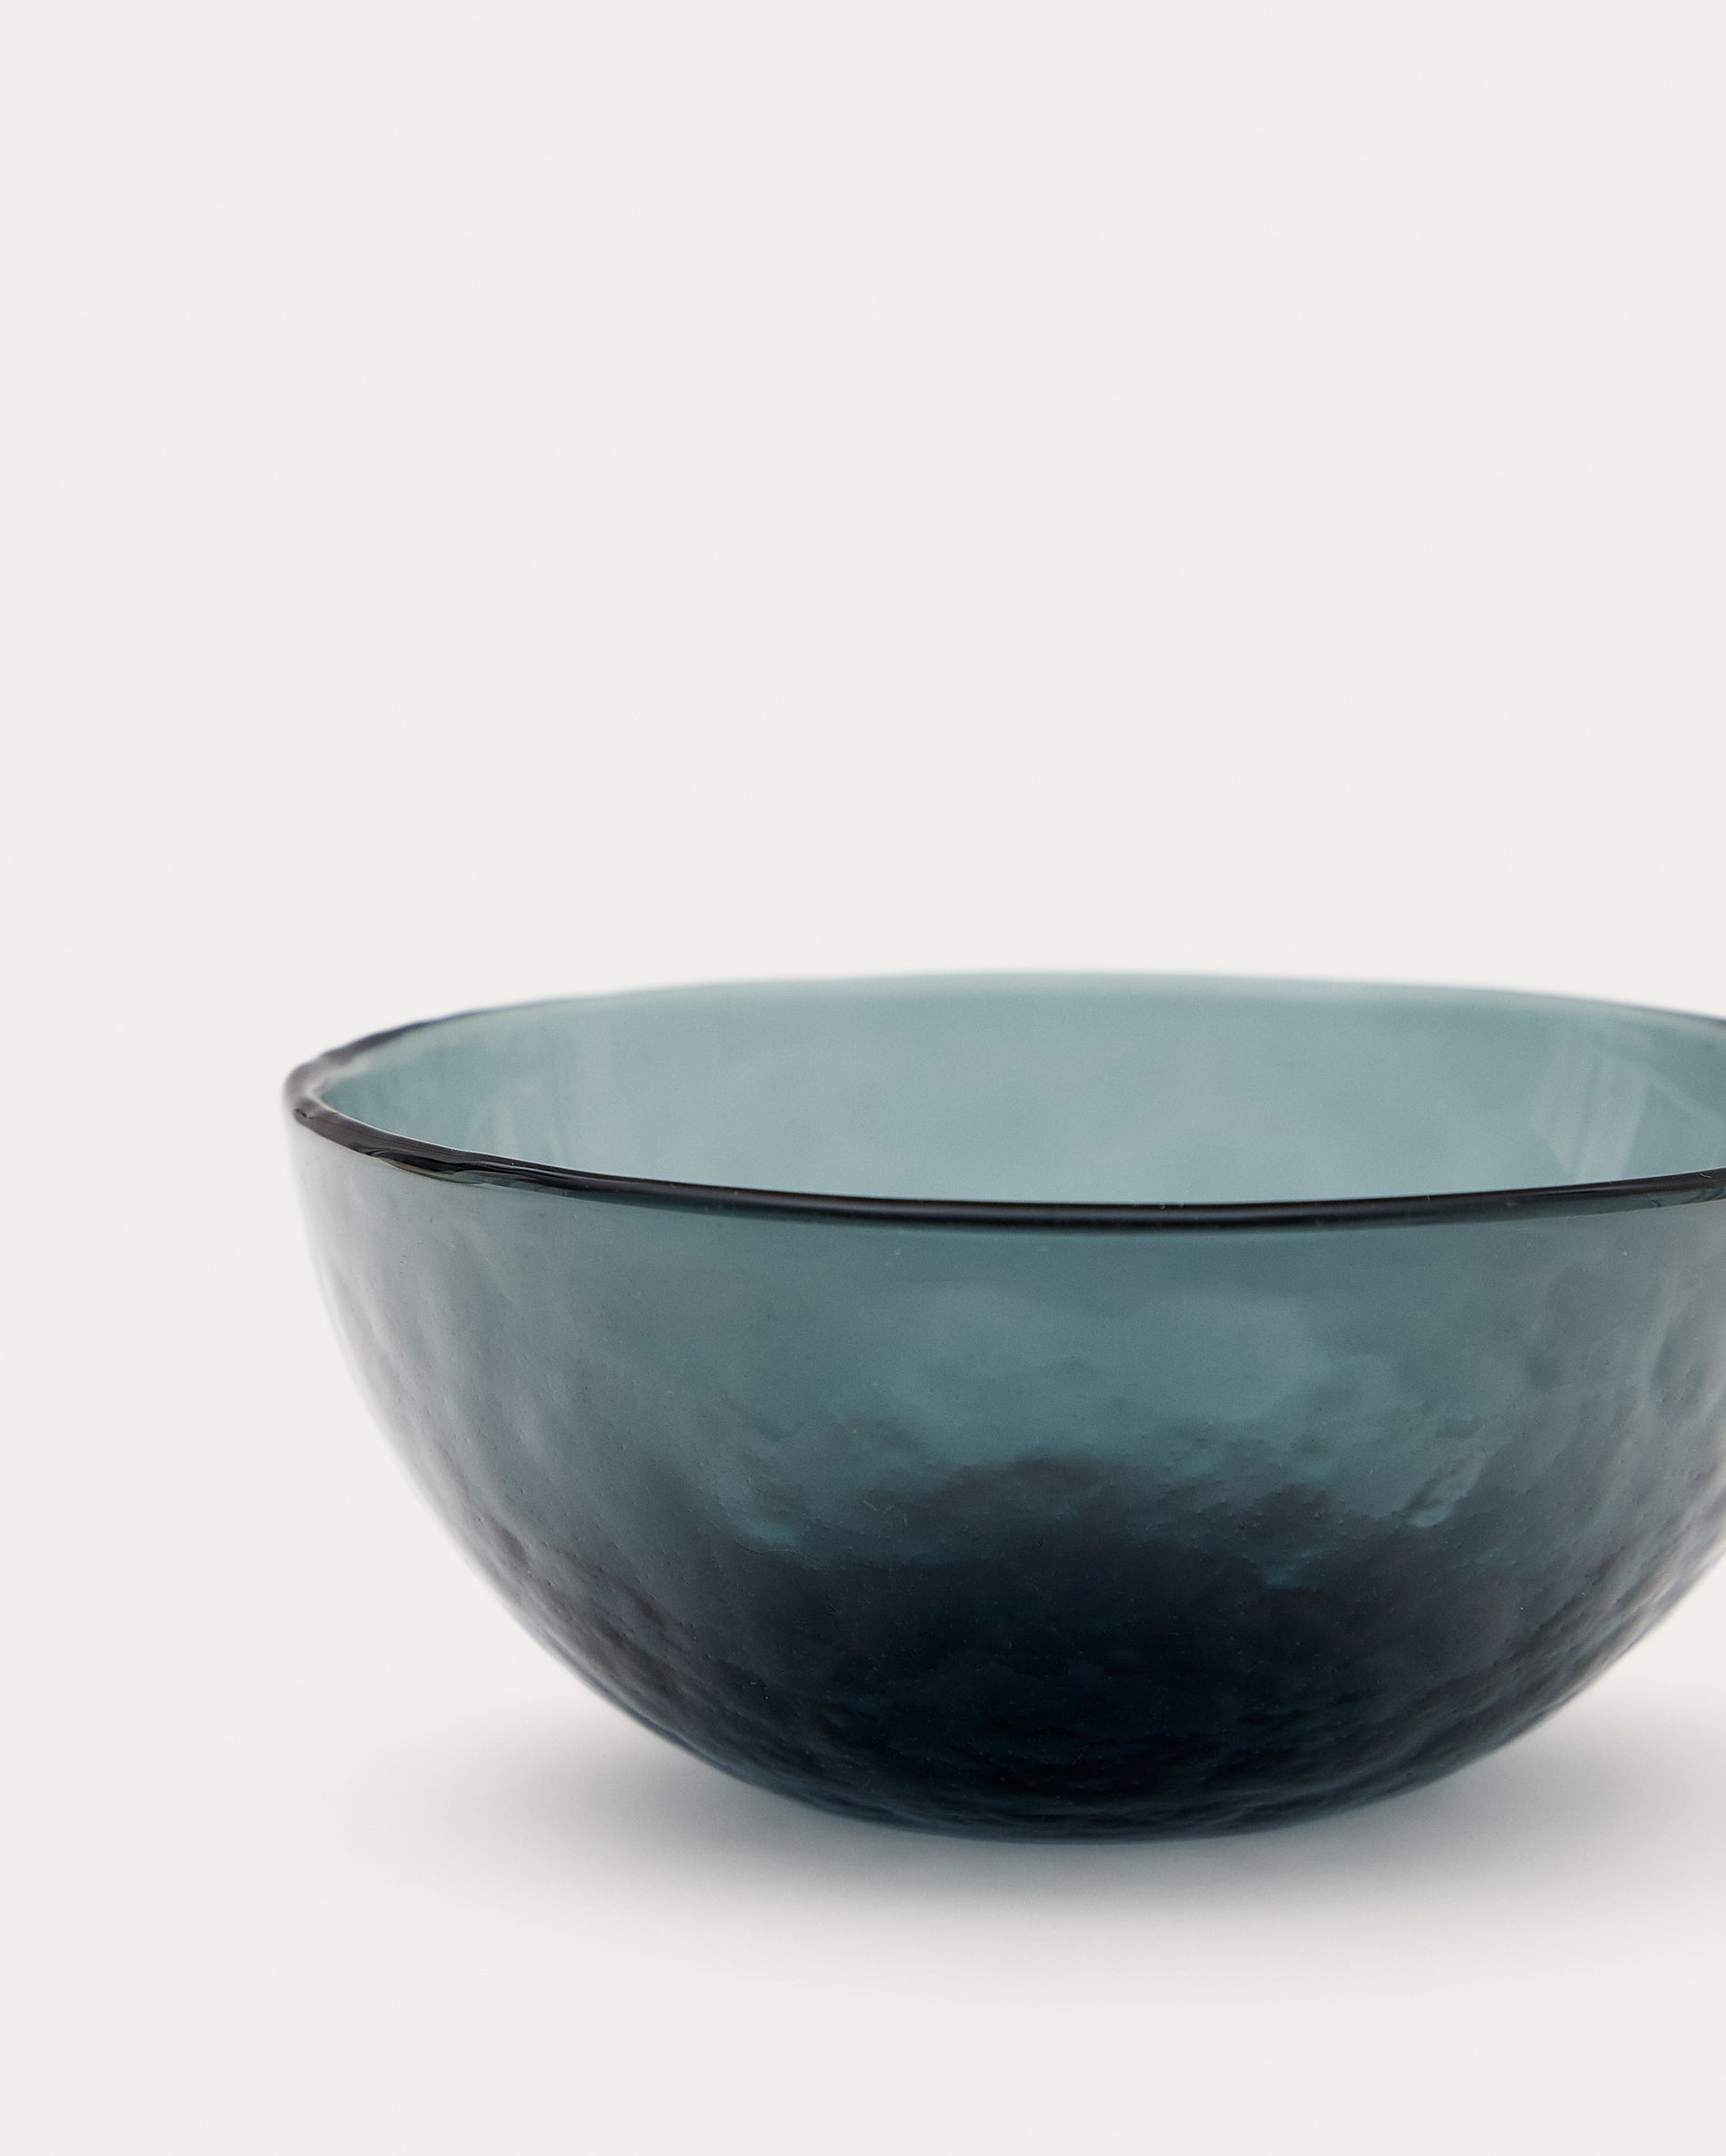 Sunera bowl made of recycled gray glass